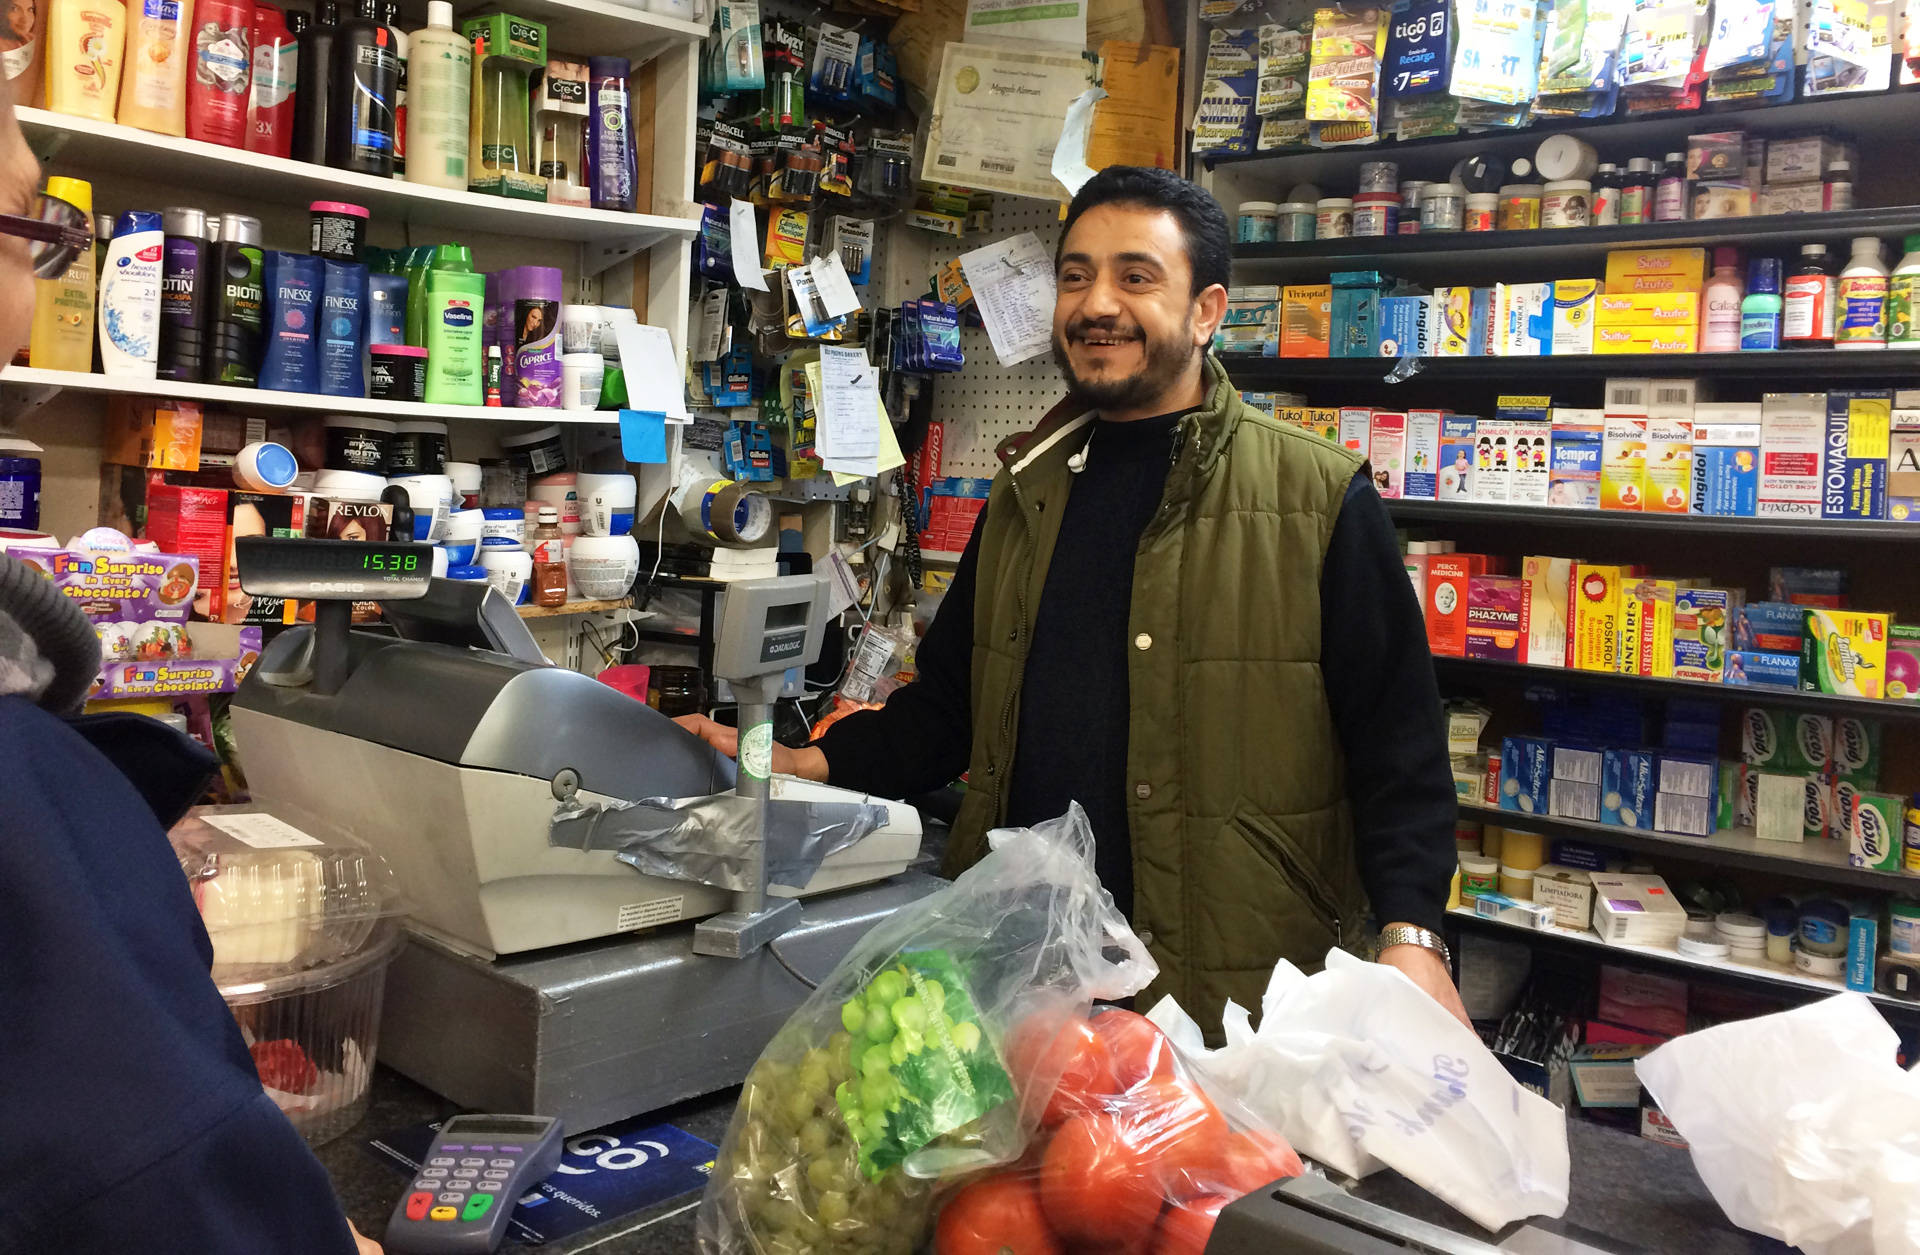 Mogeeb Alomri chats with customers at his grocery store in Oakland. Alomri believes President Trump's immigration orders could hurt his business and the likelihood his Yemeni wife and children can emigrate to the U.S.  Farida Jhabvala Romero/KQED